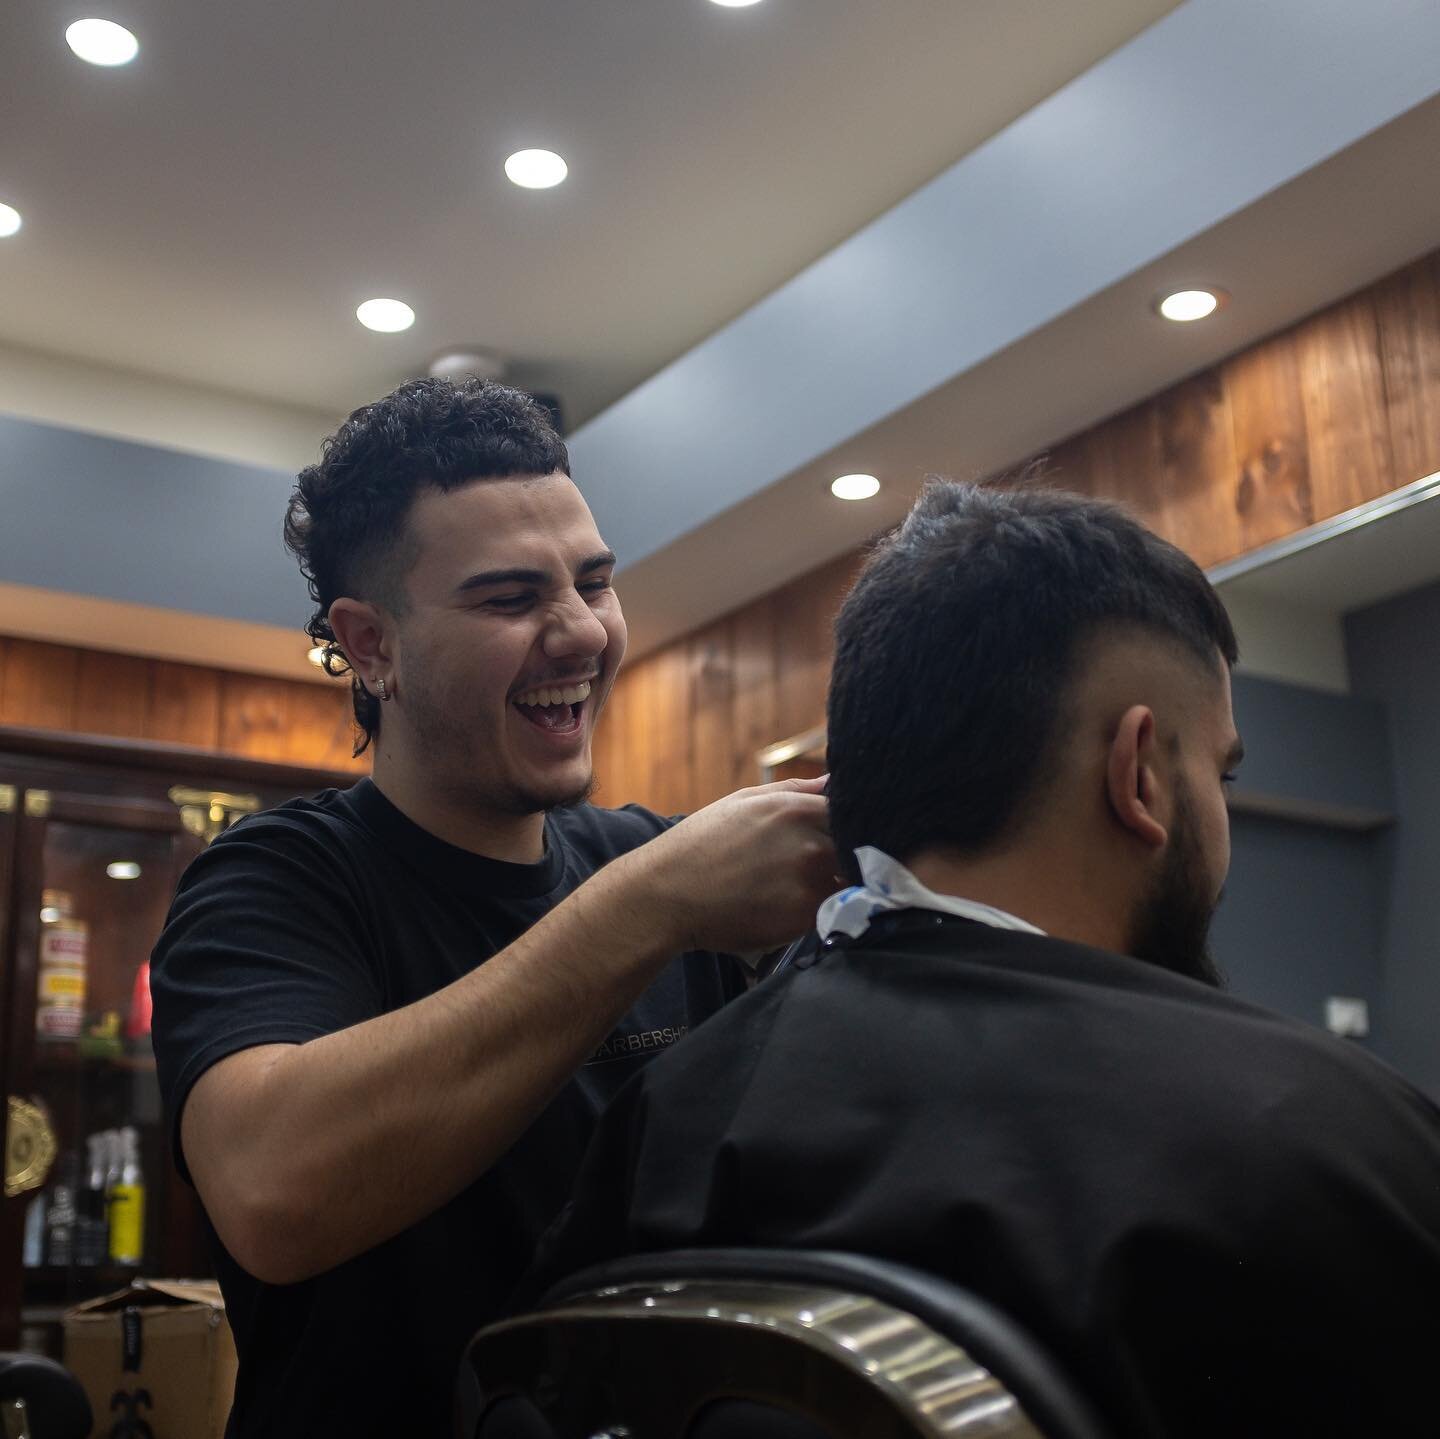 Have a great time while getting a perfect cut 🔥

We make sure that all of our clients are comfortable by having an inclusive and fun environment!

Head to our bio to see when our next cut is available - make sure to be quick, spots fill up fast.

&b